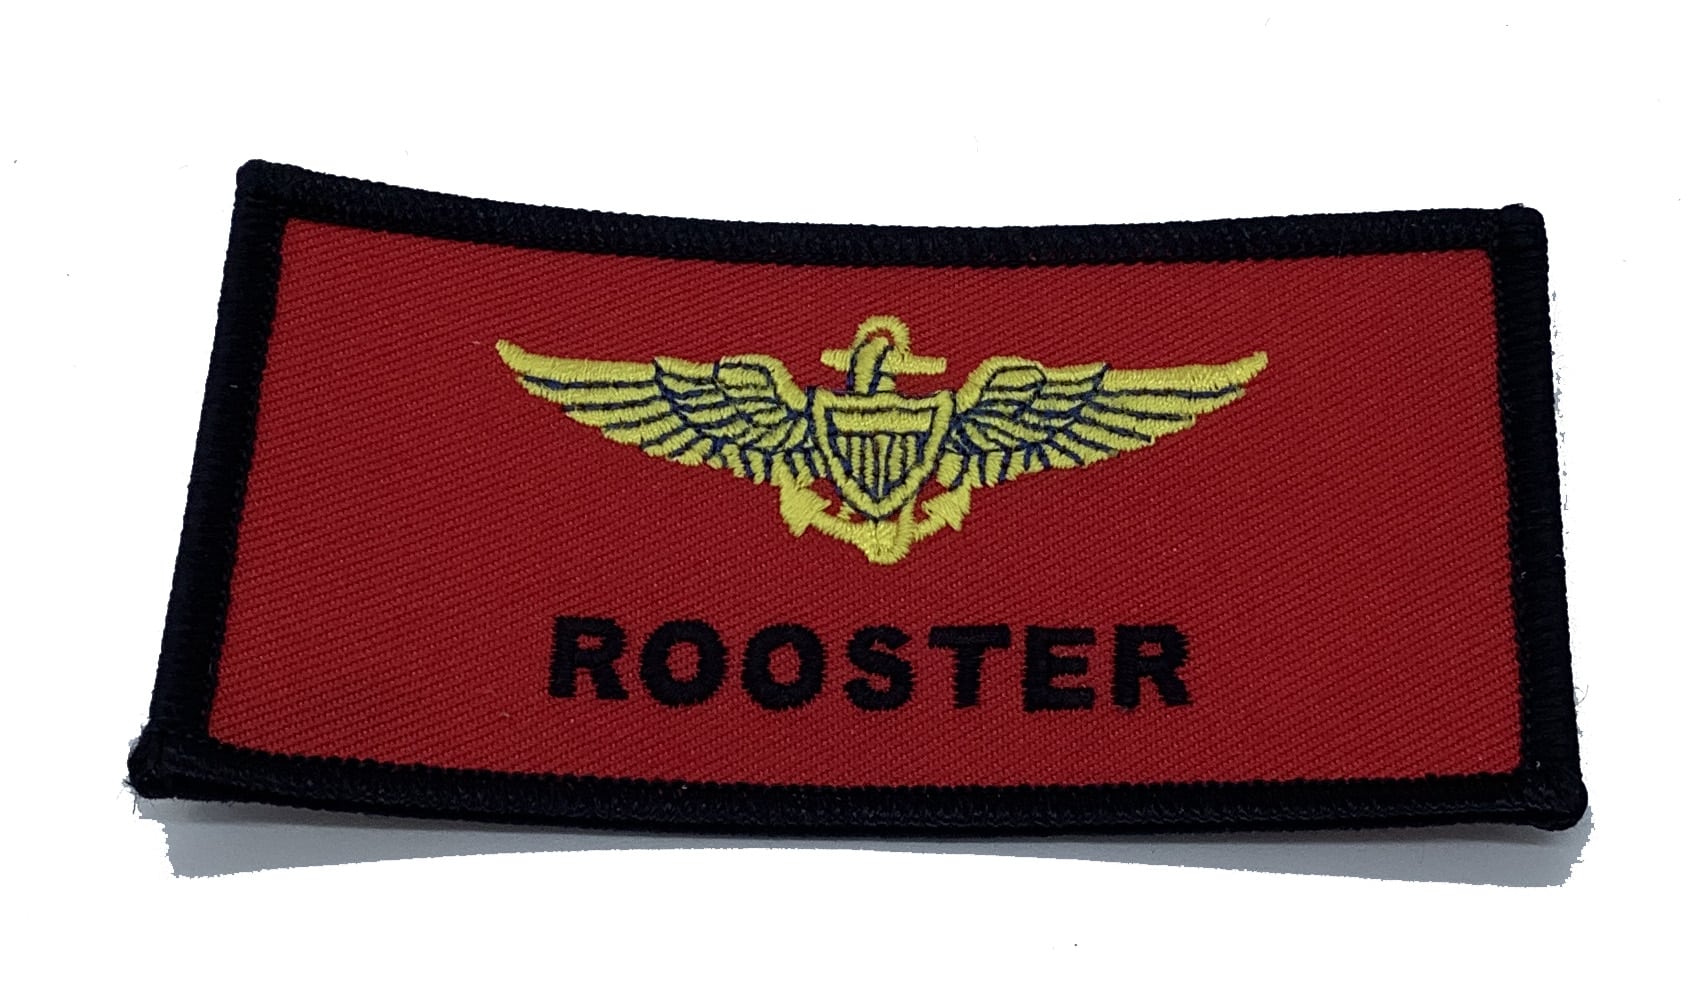 Maverick's Rooster Name patch